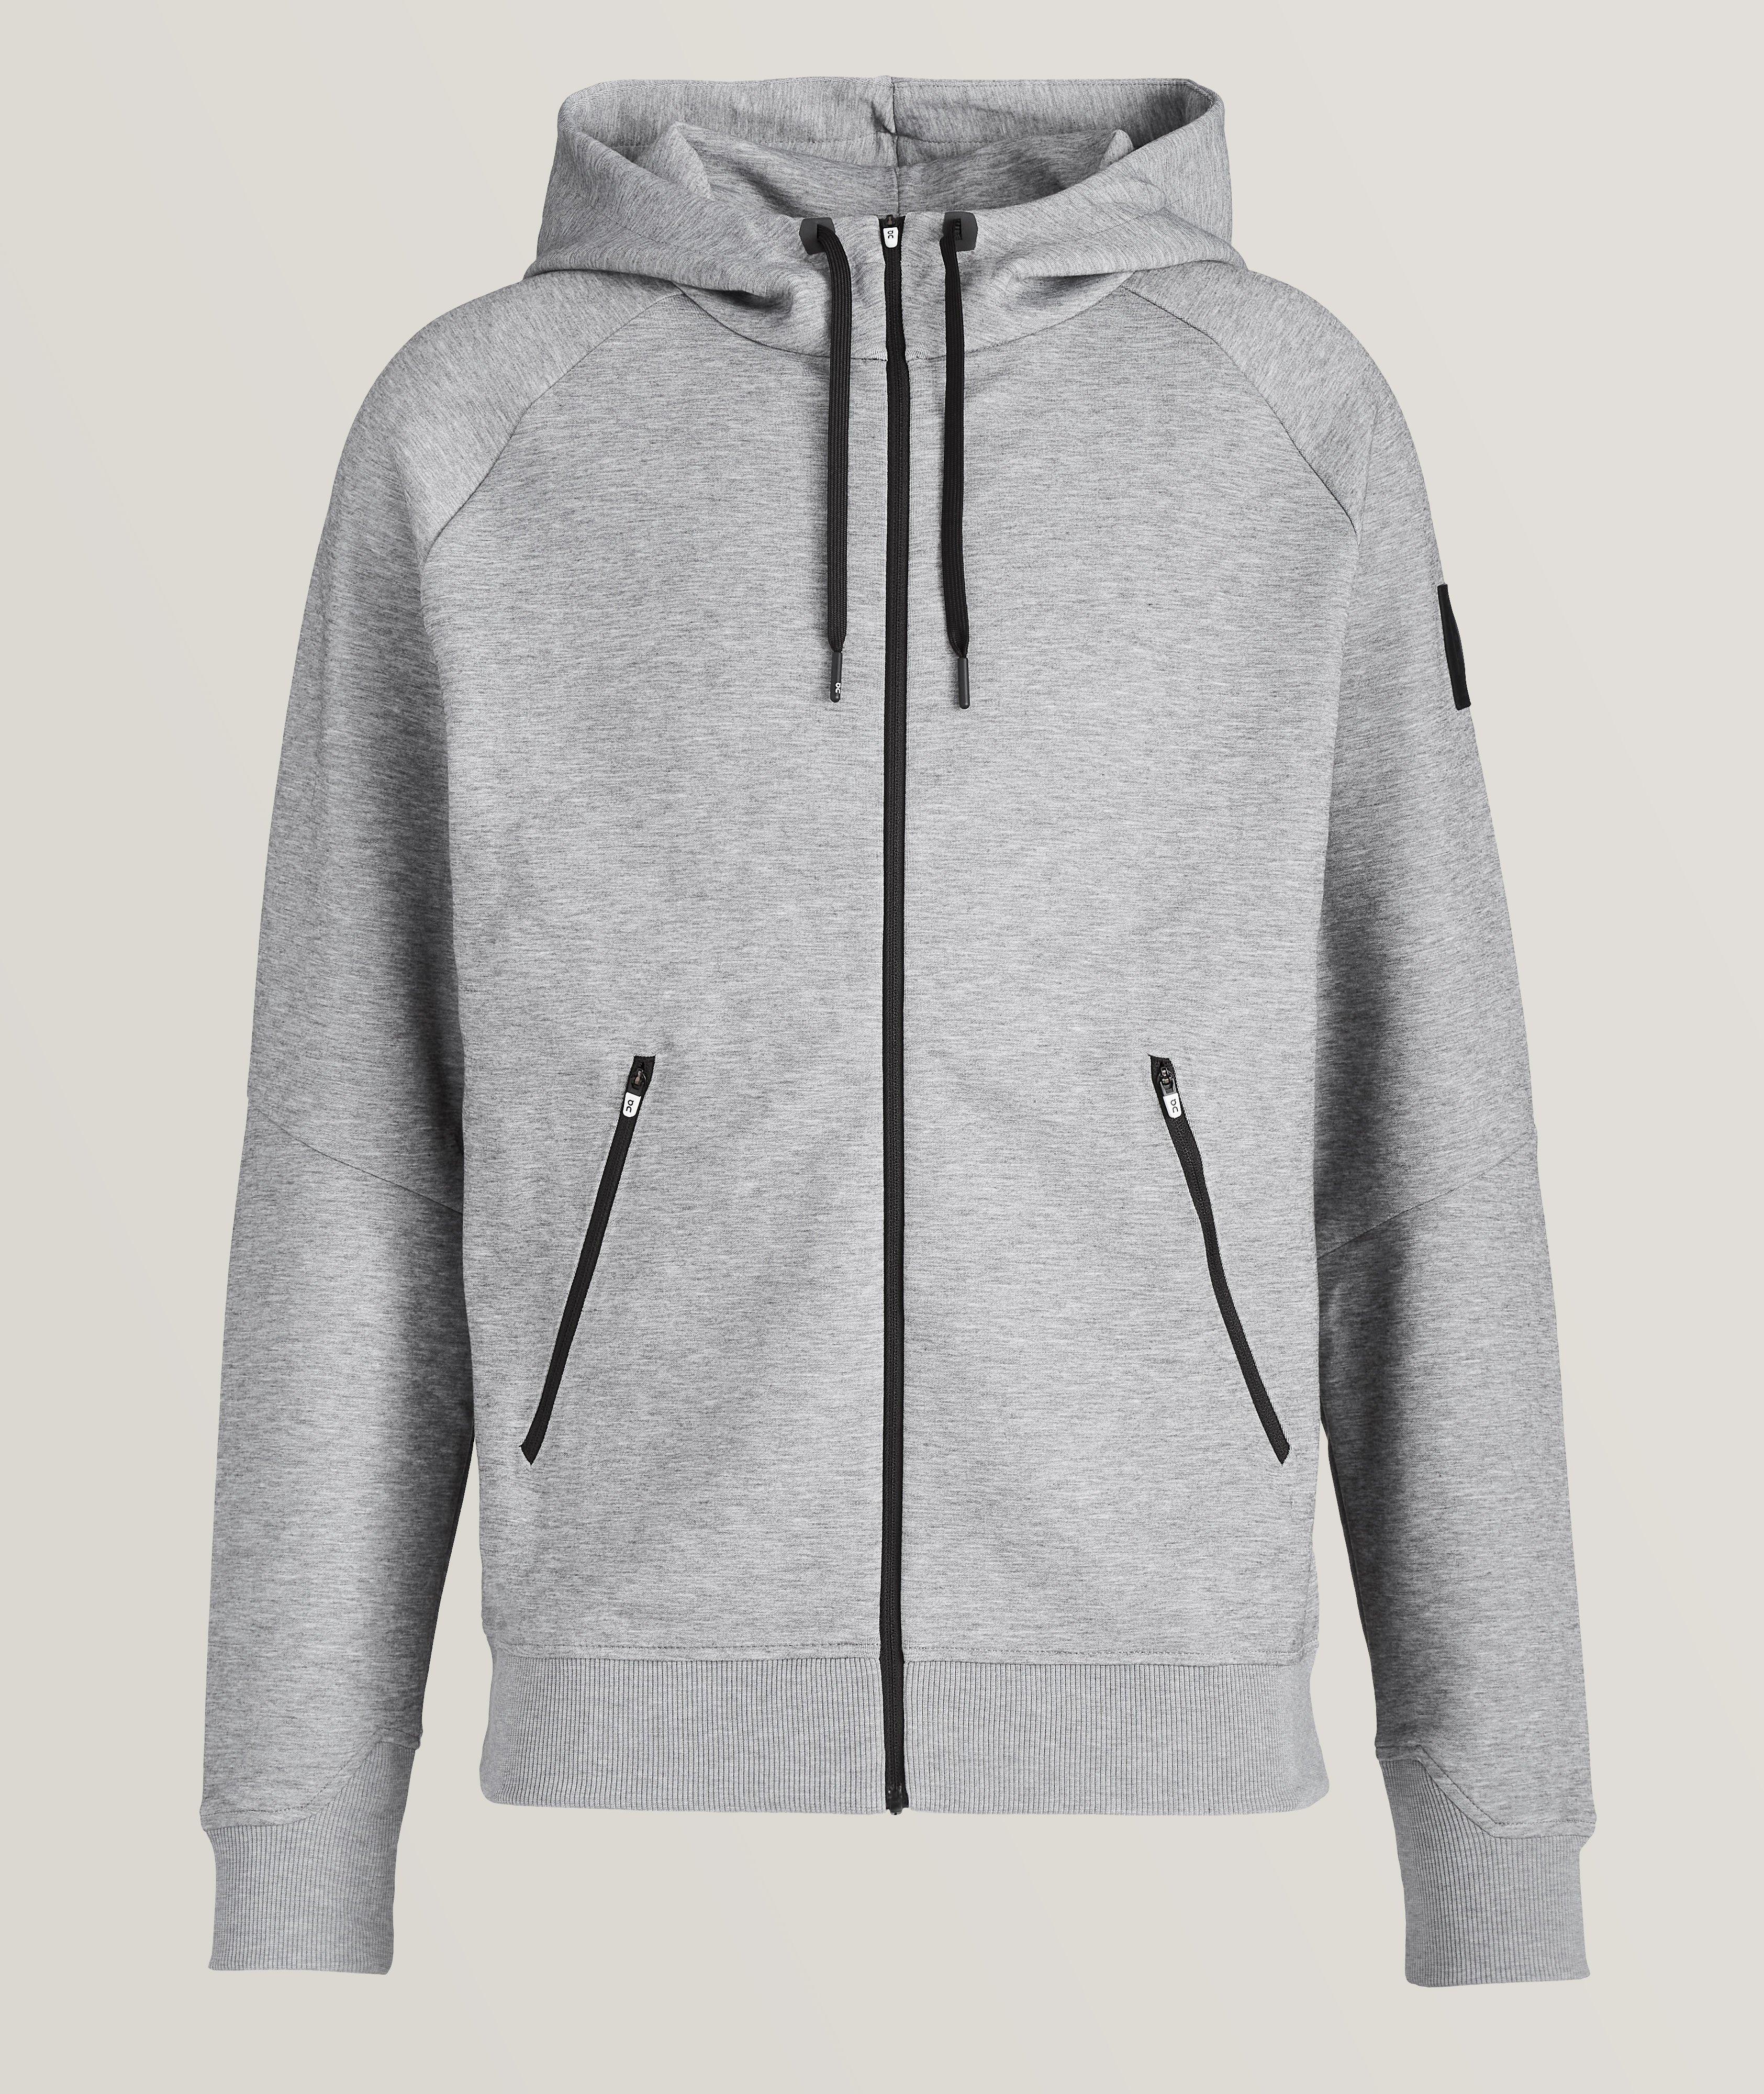 Technical Full-Zipper Hooded Stretch Sweater image 0